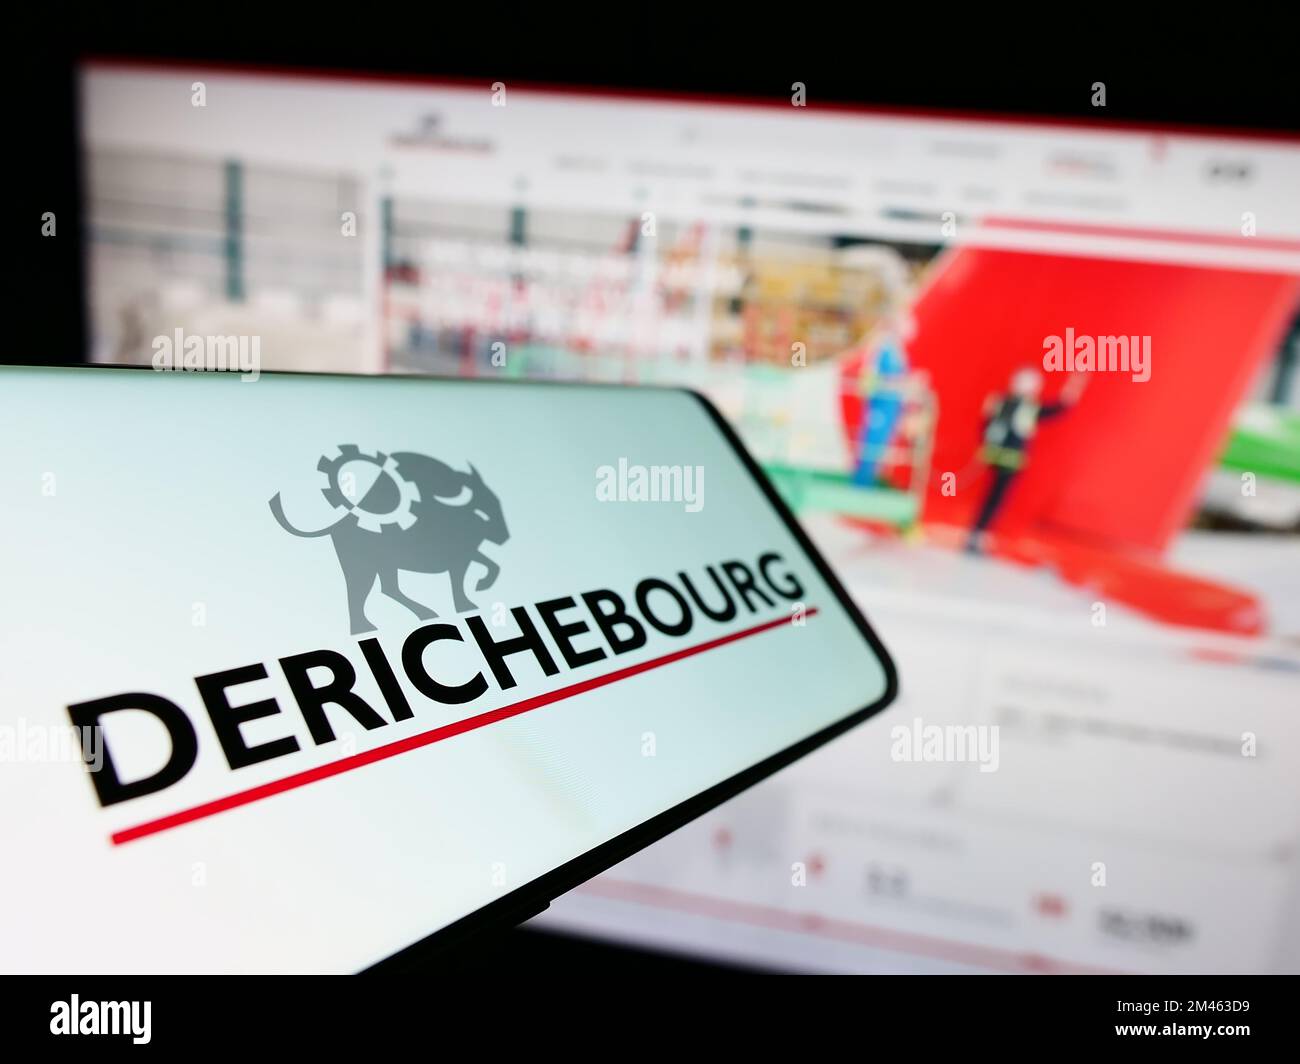 Mobile phone with logo of French recycling company Derichebourg S.A. on screen in front of website. Focus on center-left of phone display. Stock Photo